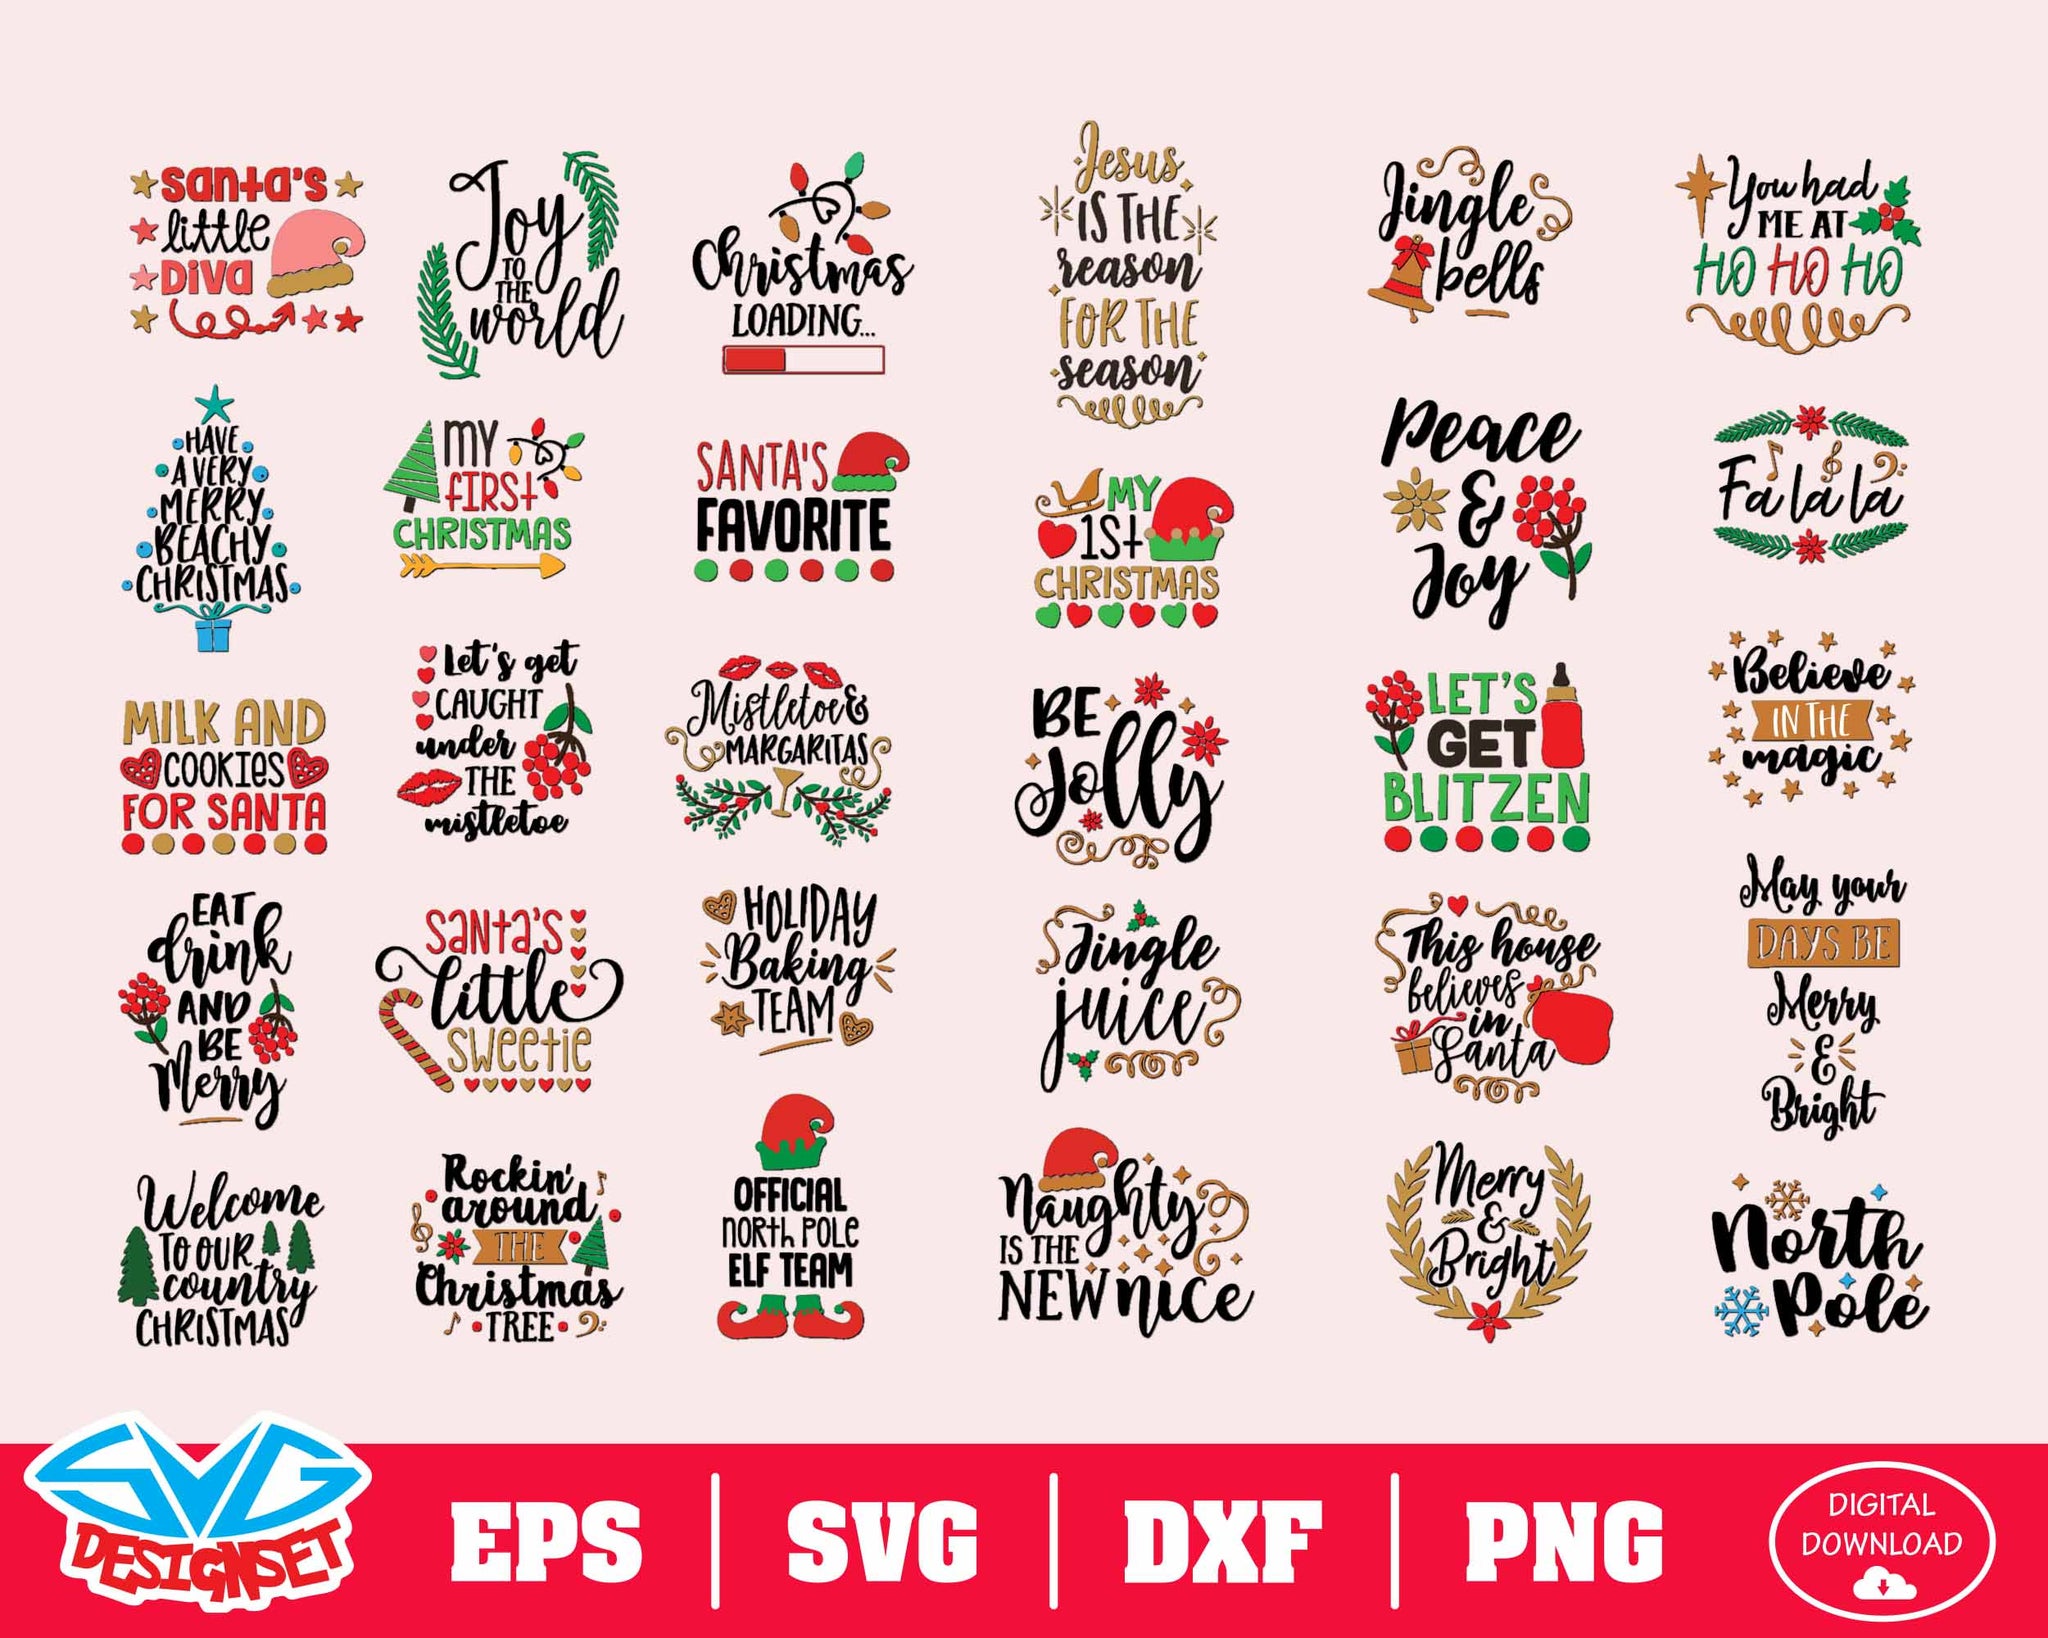 Christmas Bundle Svg, Dxf, Eps, Png, Clipart, Silhouette and Cutfiles #10 - SVGDesignSets